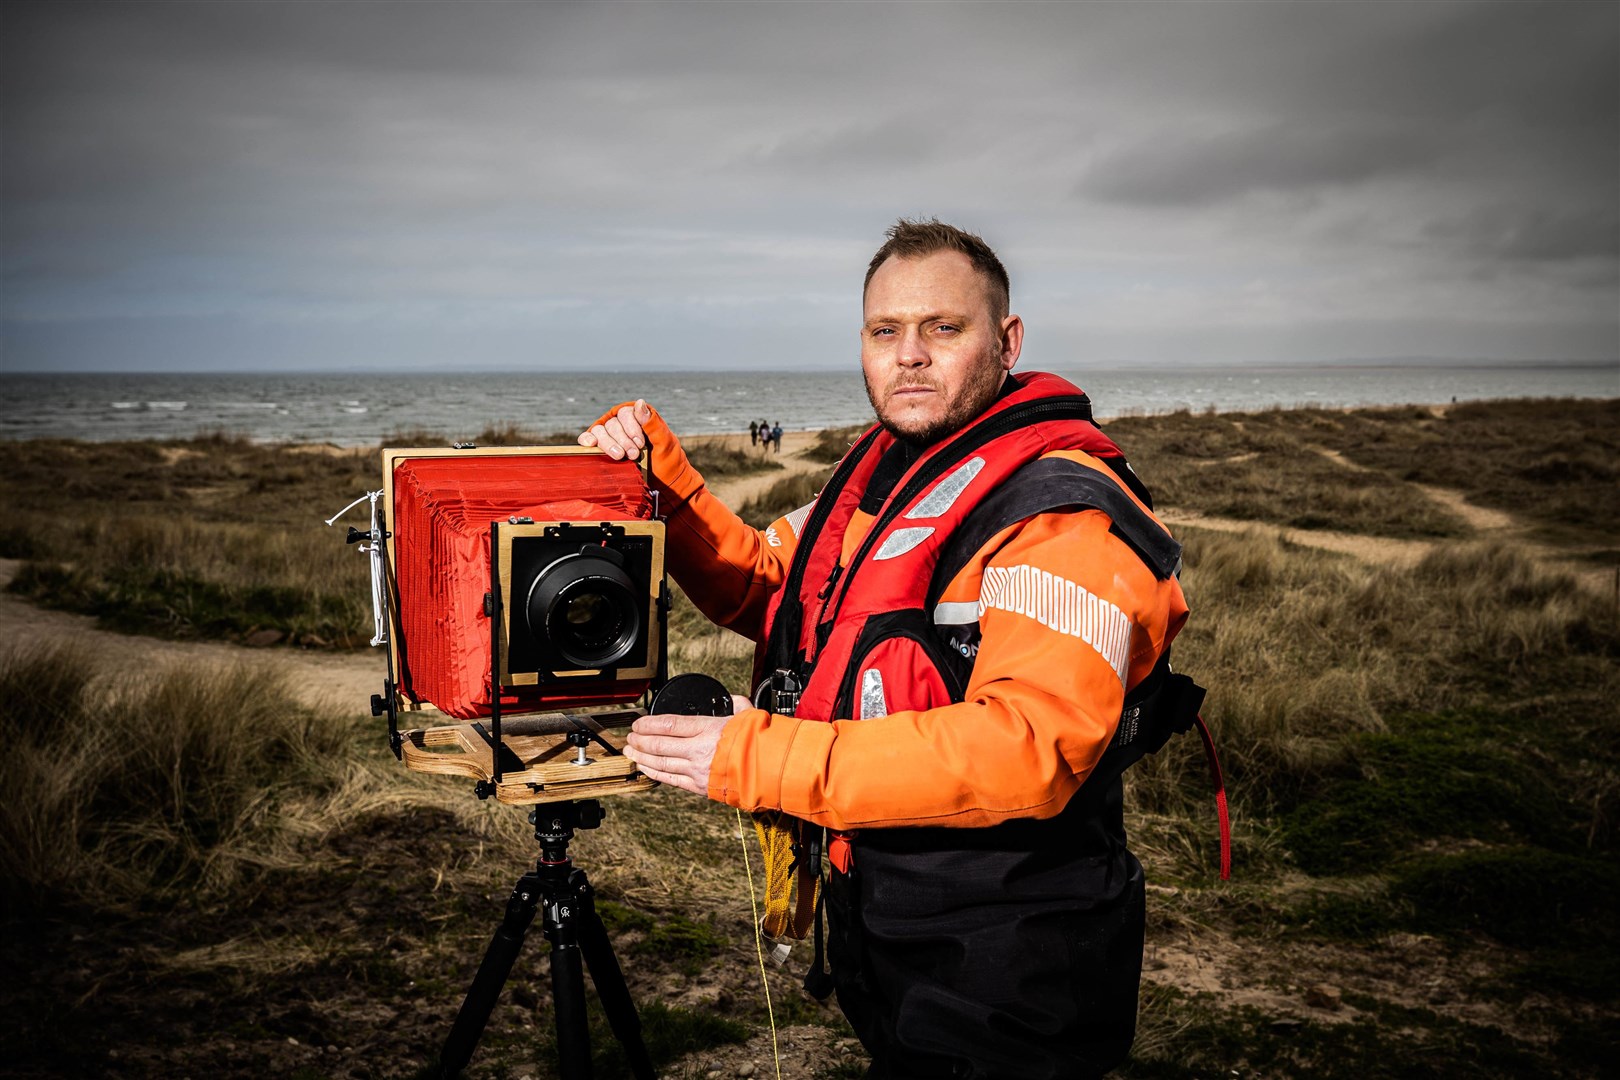 Spirit:360 artist Simon Riddell with traditional collodion wet plate photography process.